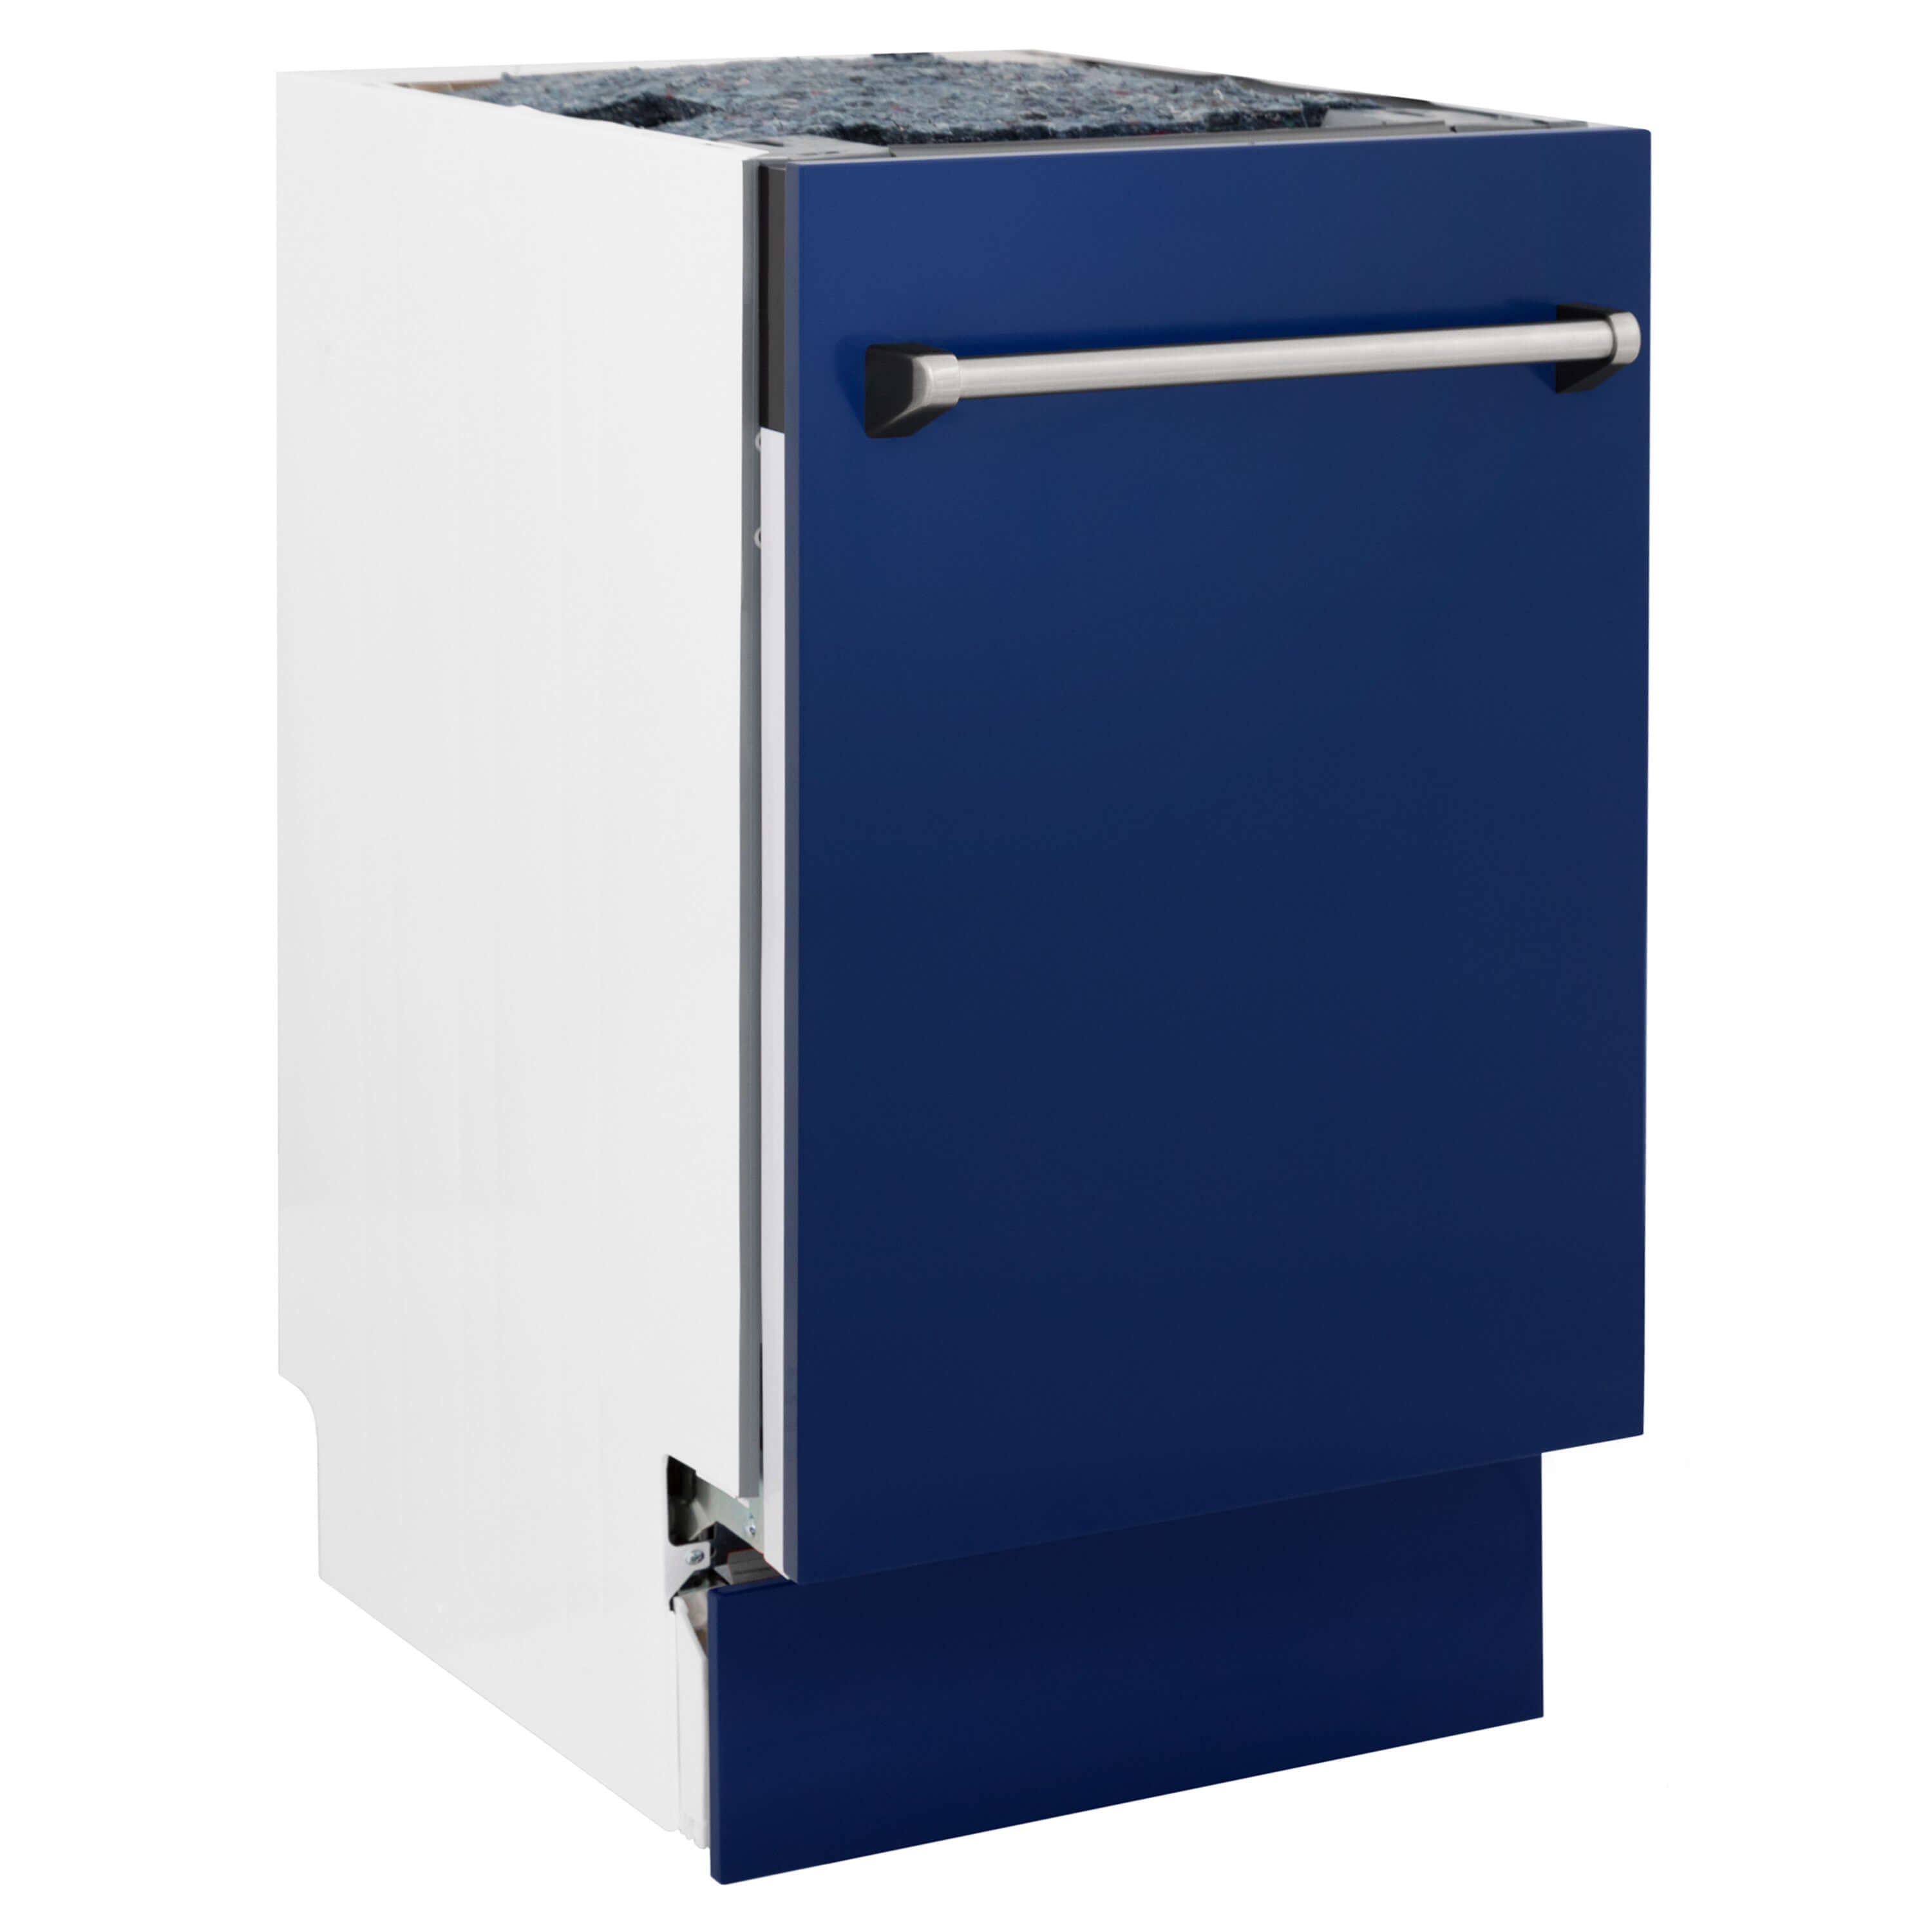 ZLINE 18 in. Tallac Series 3rd Rack Top Control Built-In Dishwasher in Blue Gloss with Stainless Steel Tub, 51dBa (DWV-BG-18) front, closed.